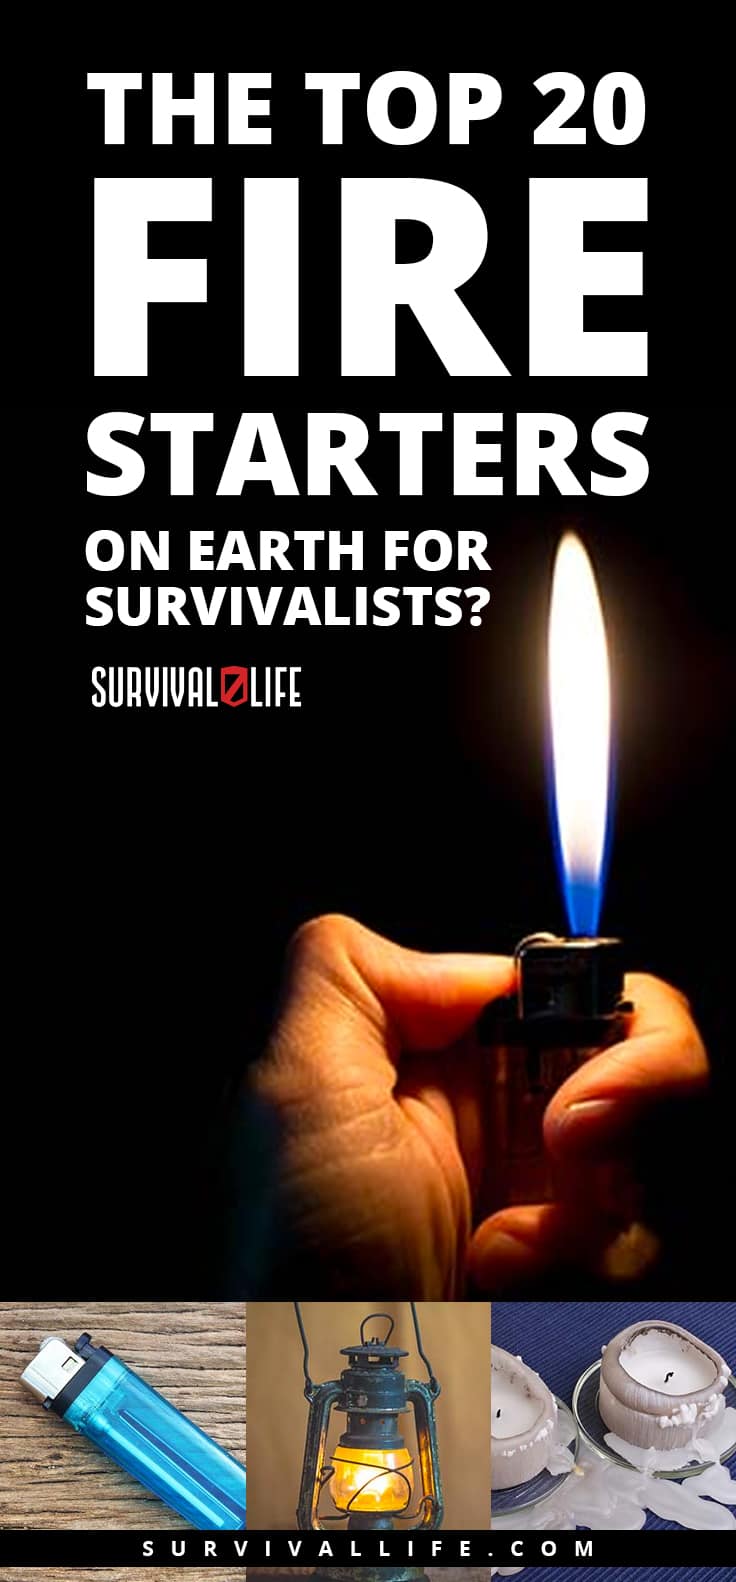 The Top 20 Fire Starters On Earth For Survivalists? | Survival Life